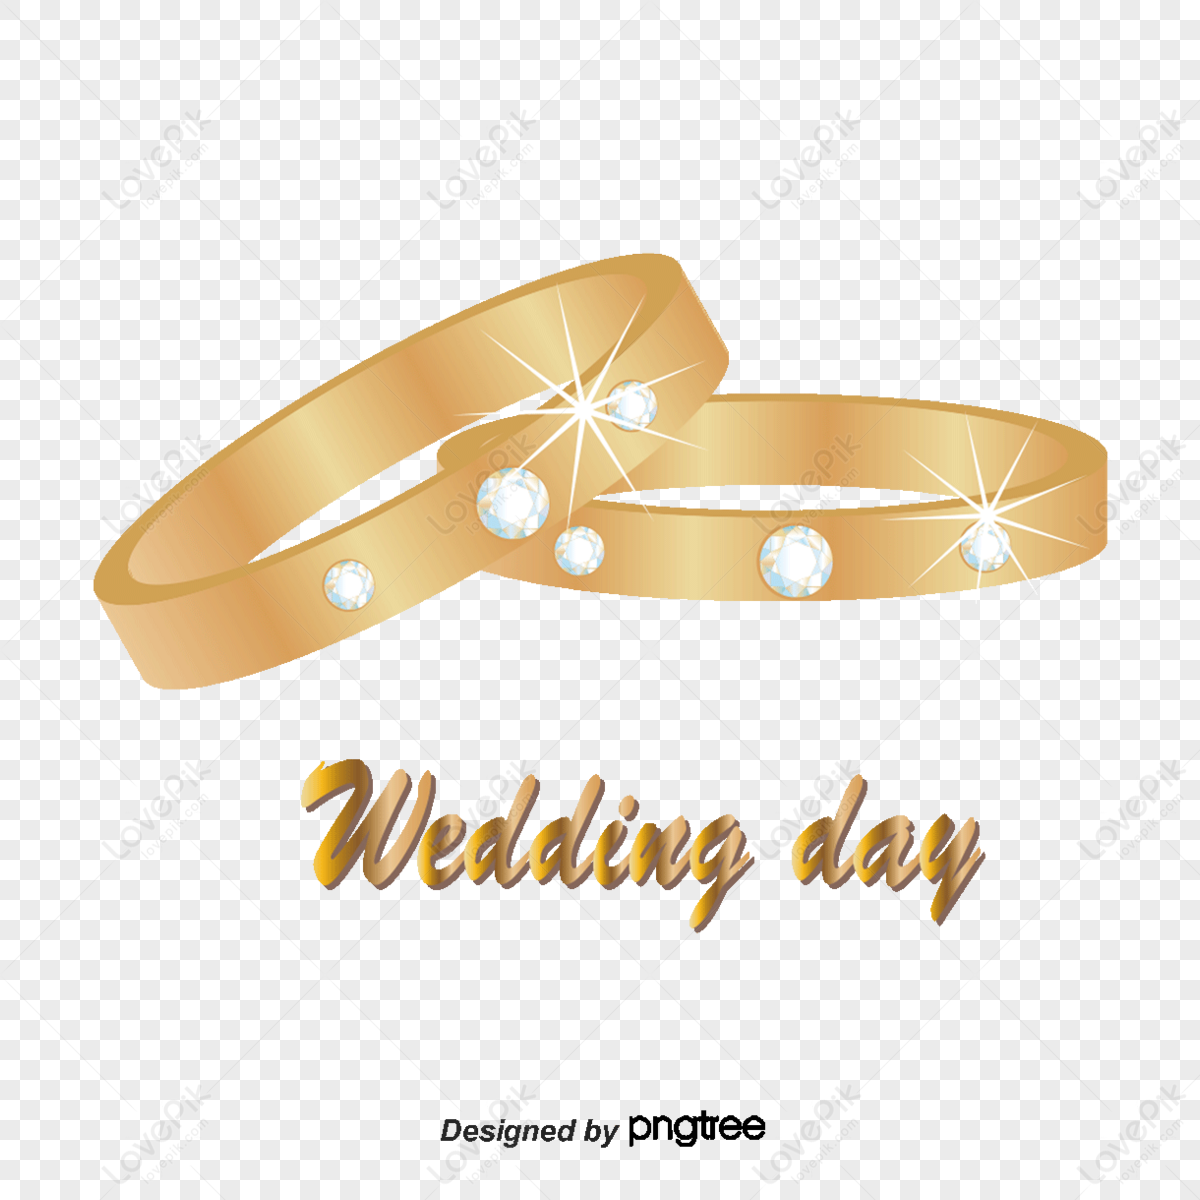 Gold Wedding Rings PNG Clip Art - Best WEB Clipart